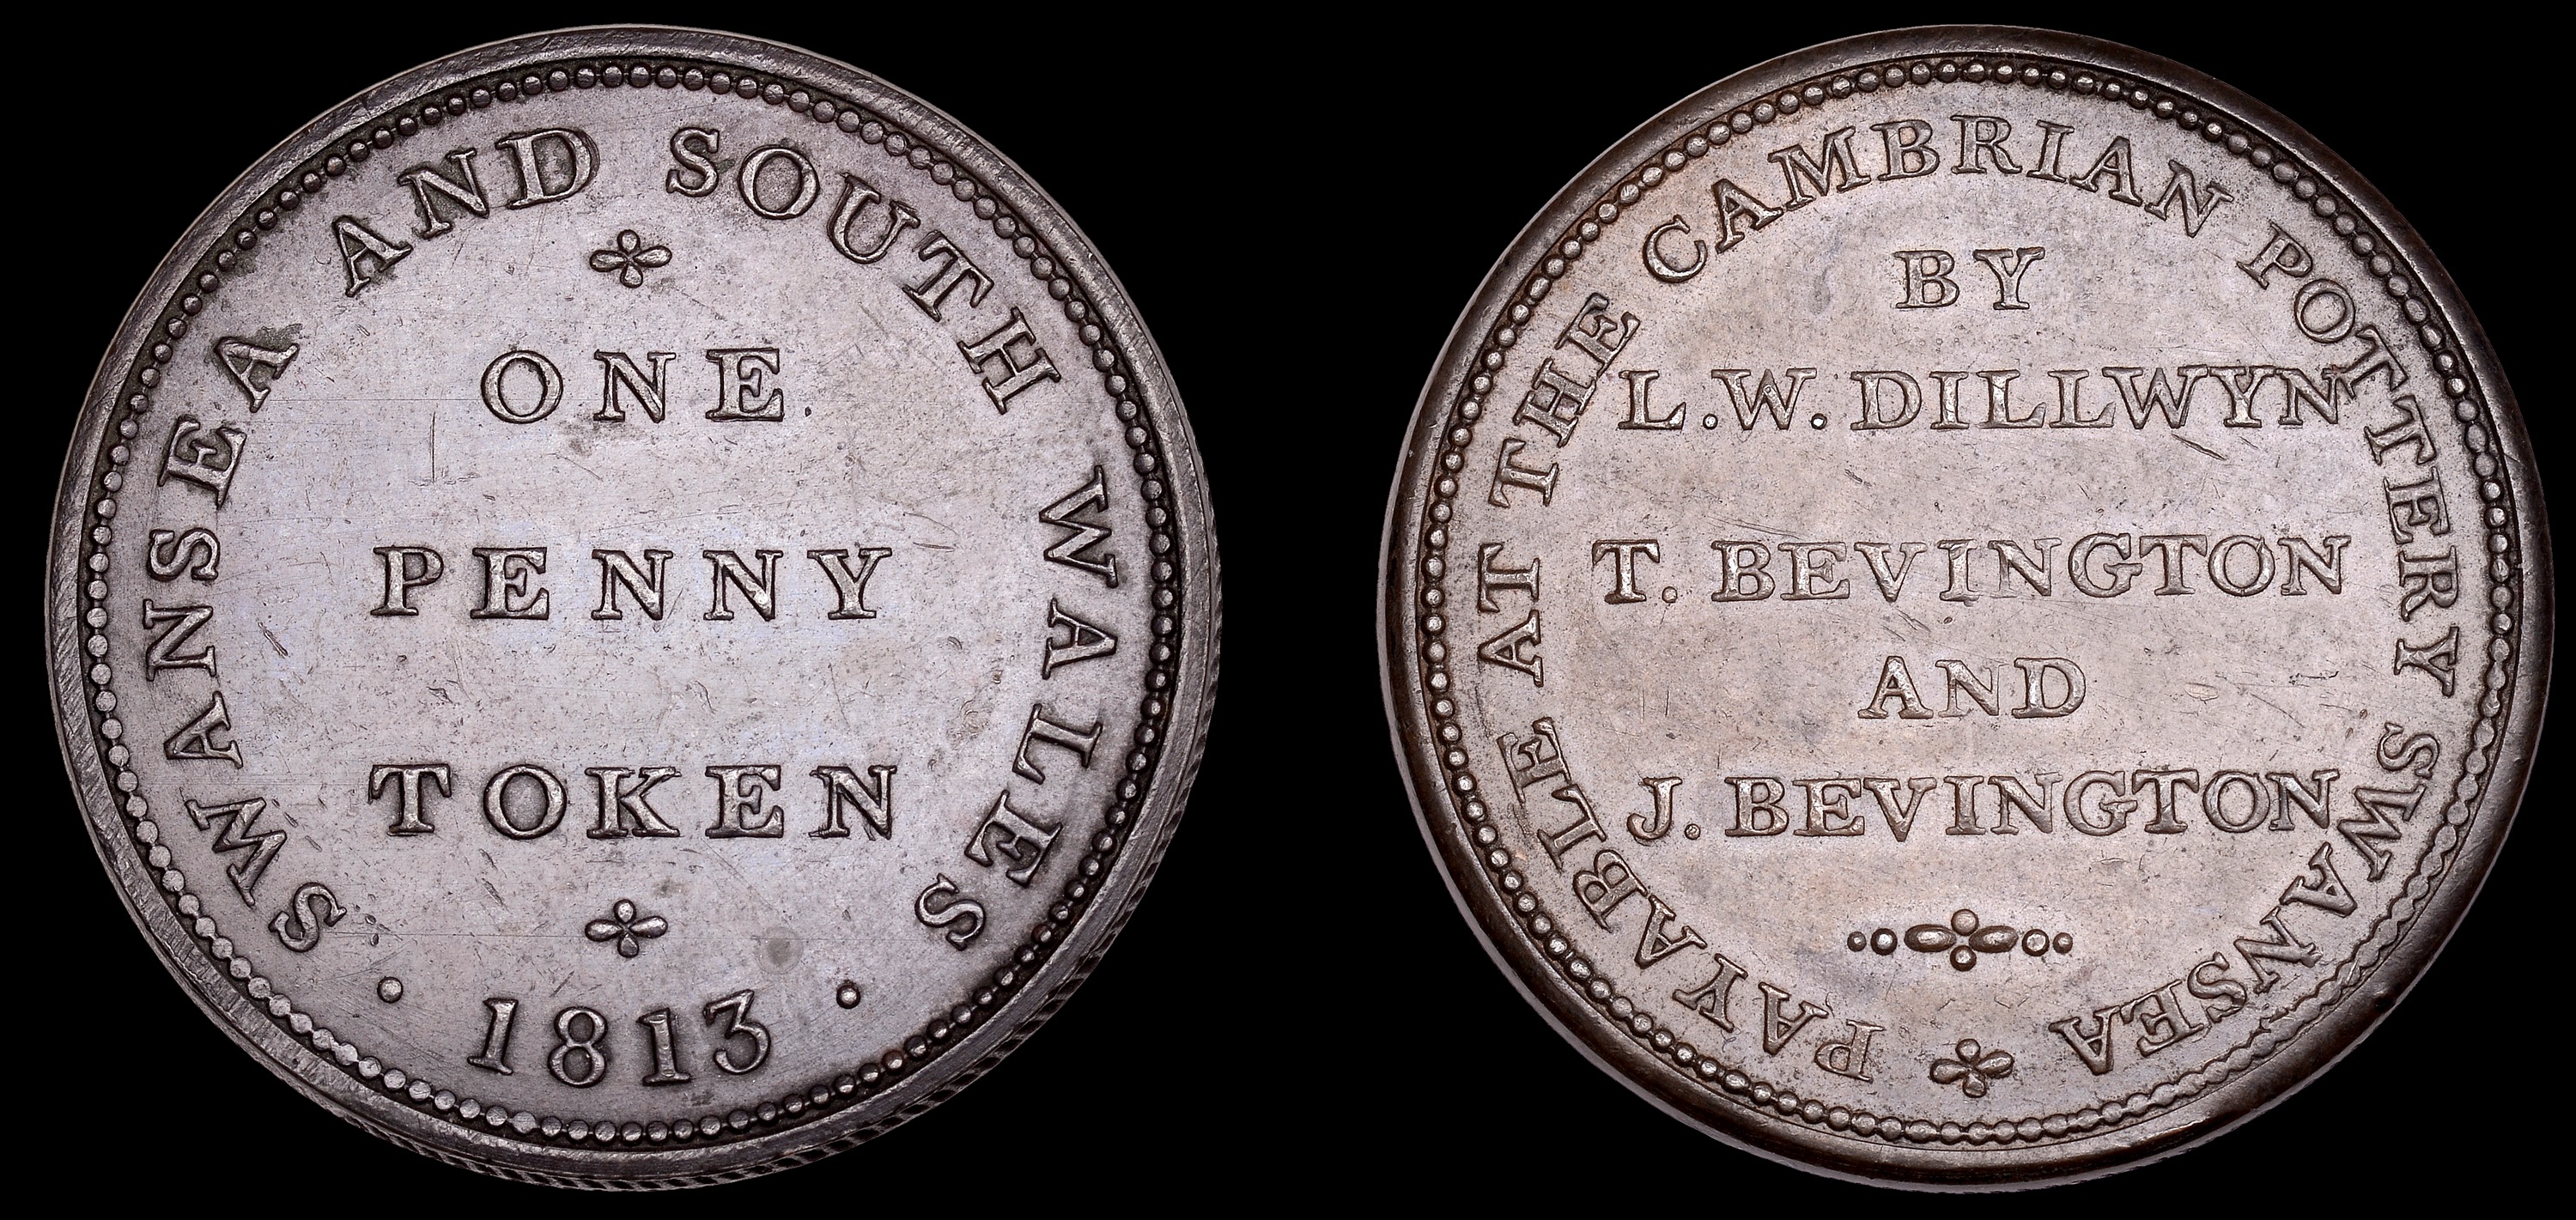 TOKENS FROM THE LATE DAVID GRIFFITHS COLLECTION (PART VII)